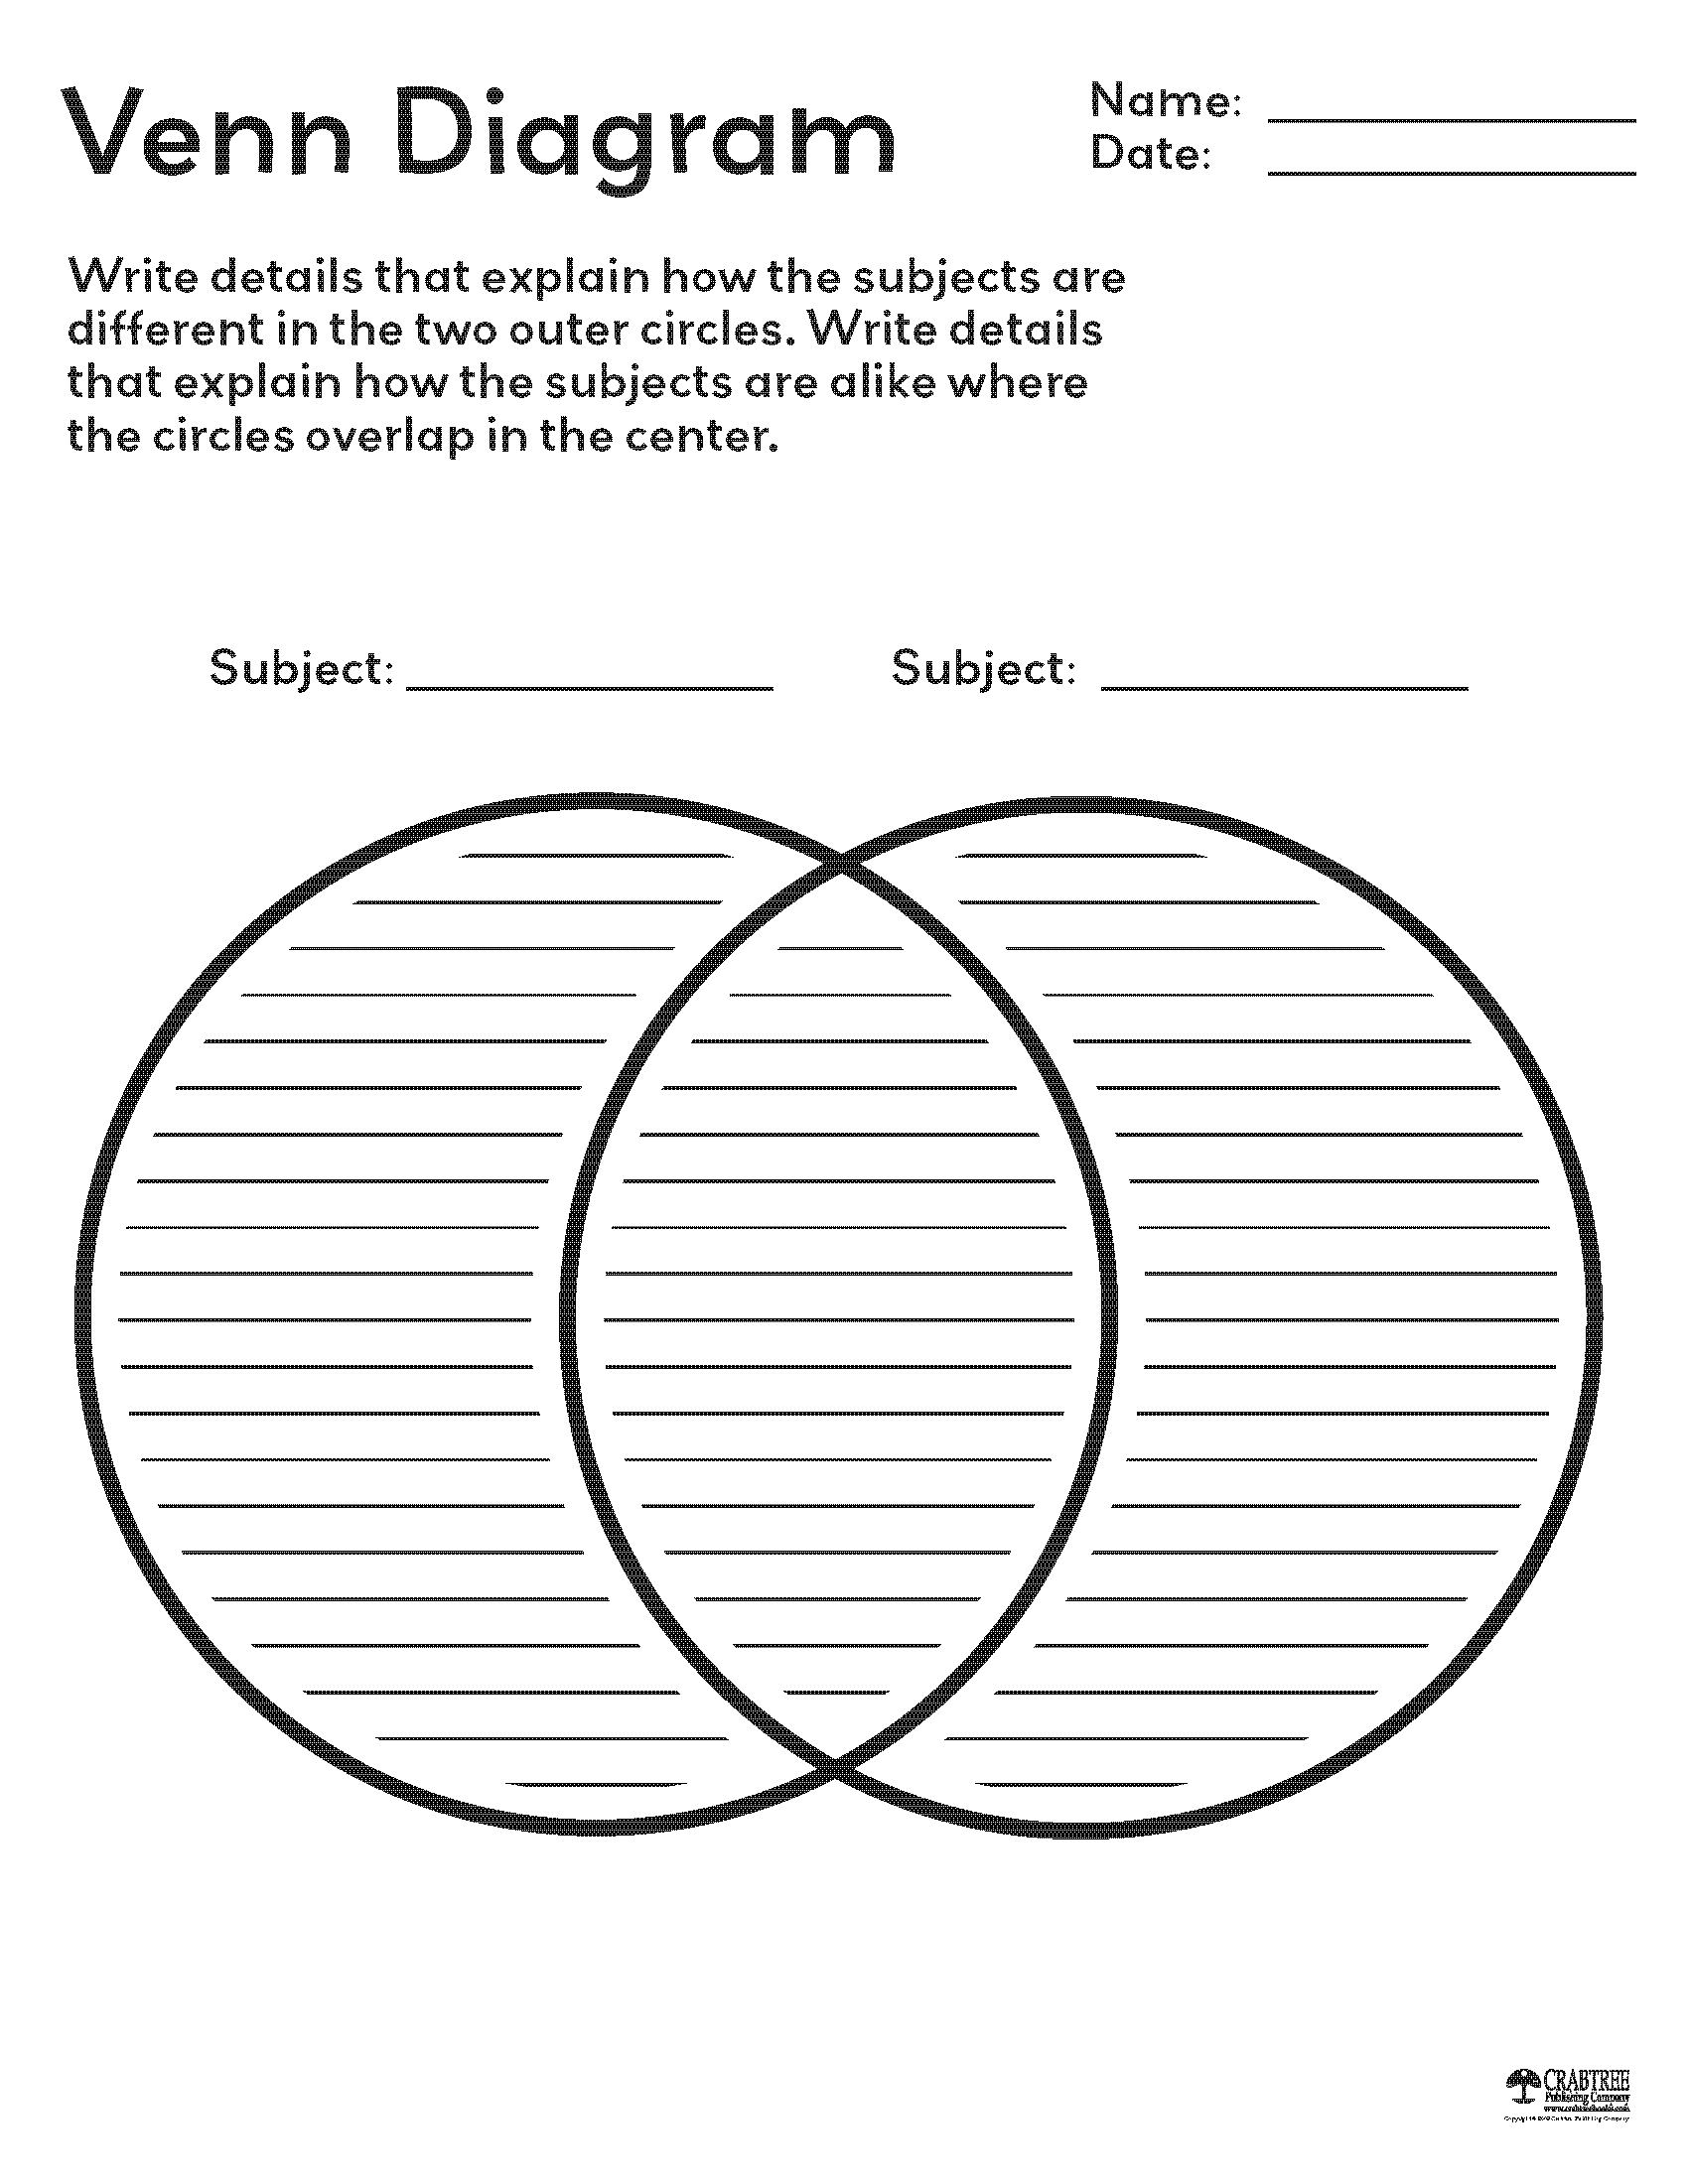 Free Printable Graphic Organizers From Crabtree Publishing | 3Rd - Free Printable Graphic Organizers